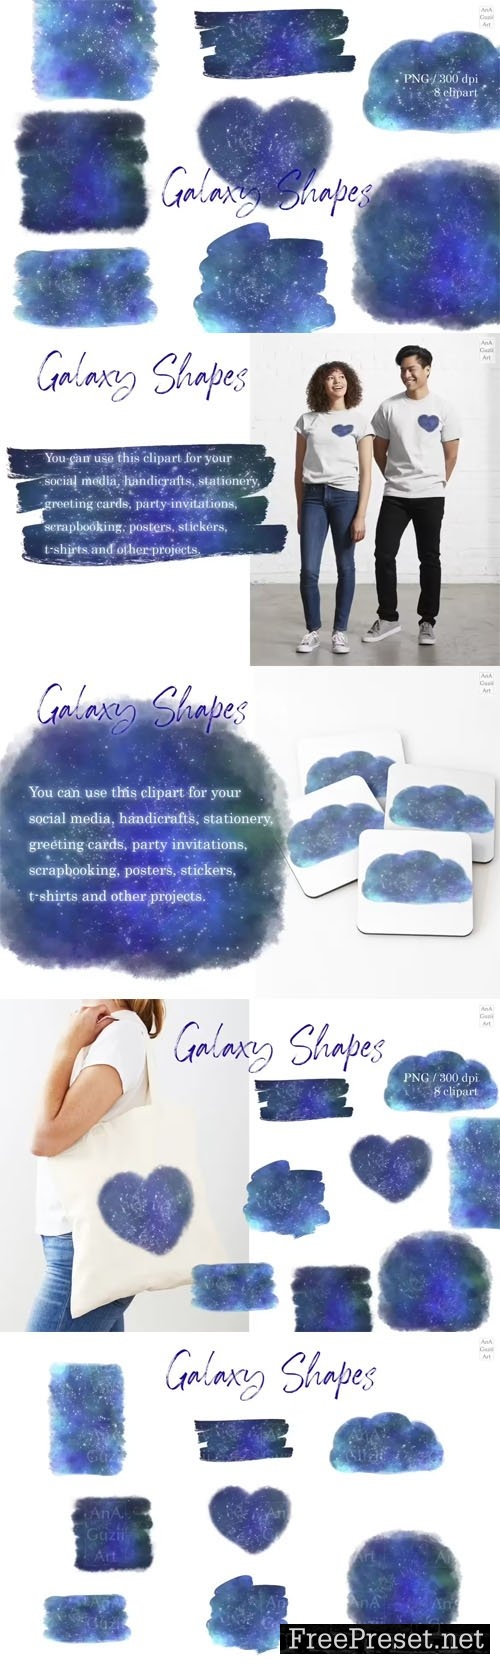 Watercolor Galaxy Shapes PNG Clipart